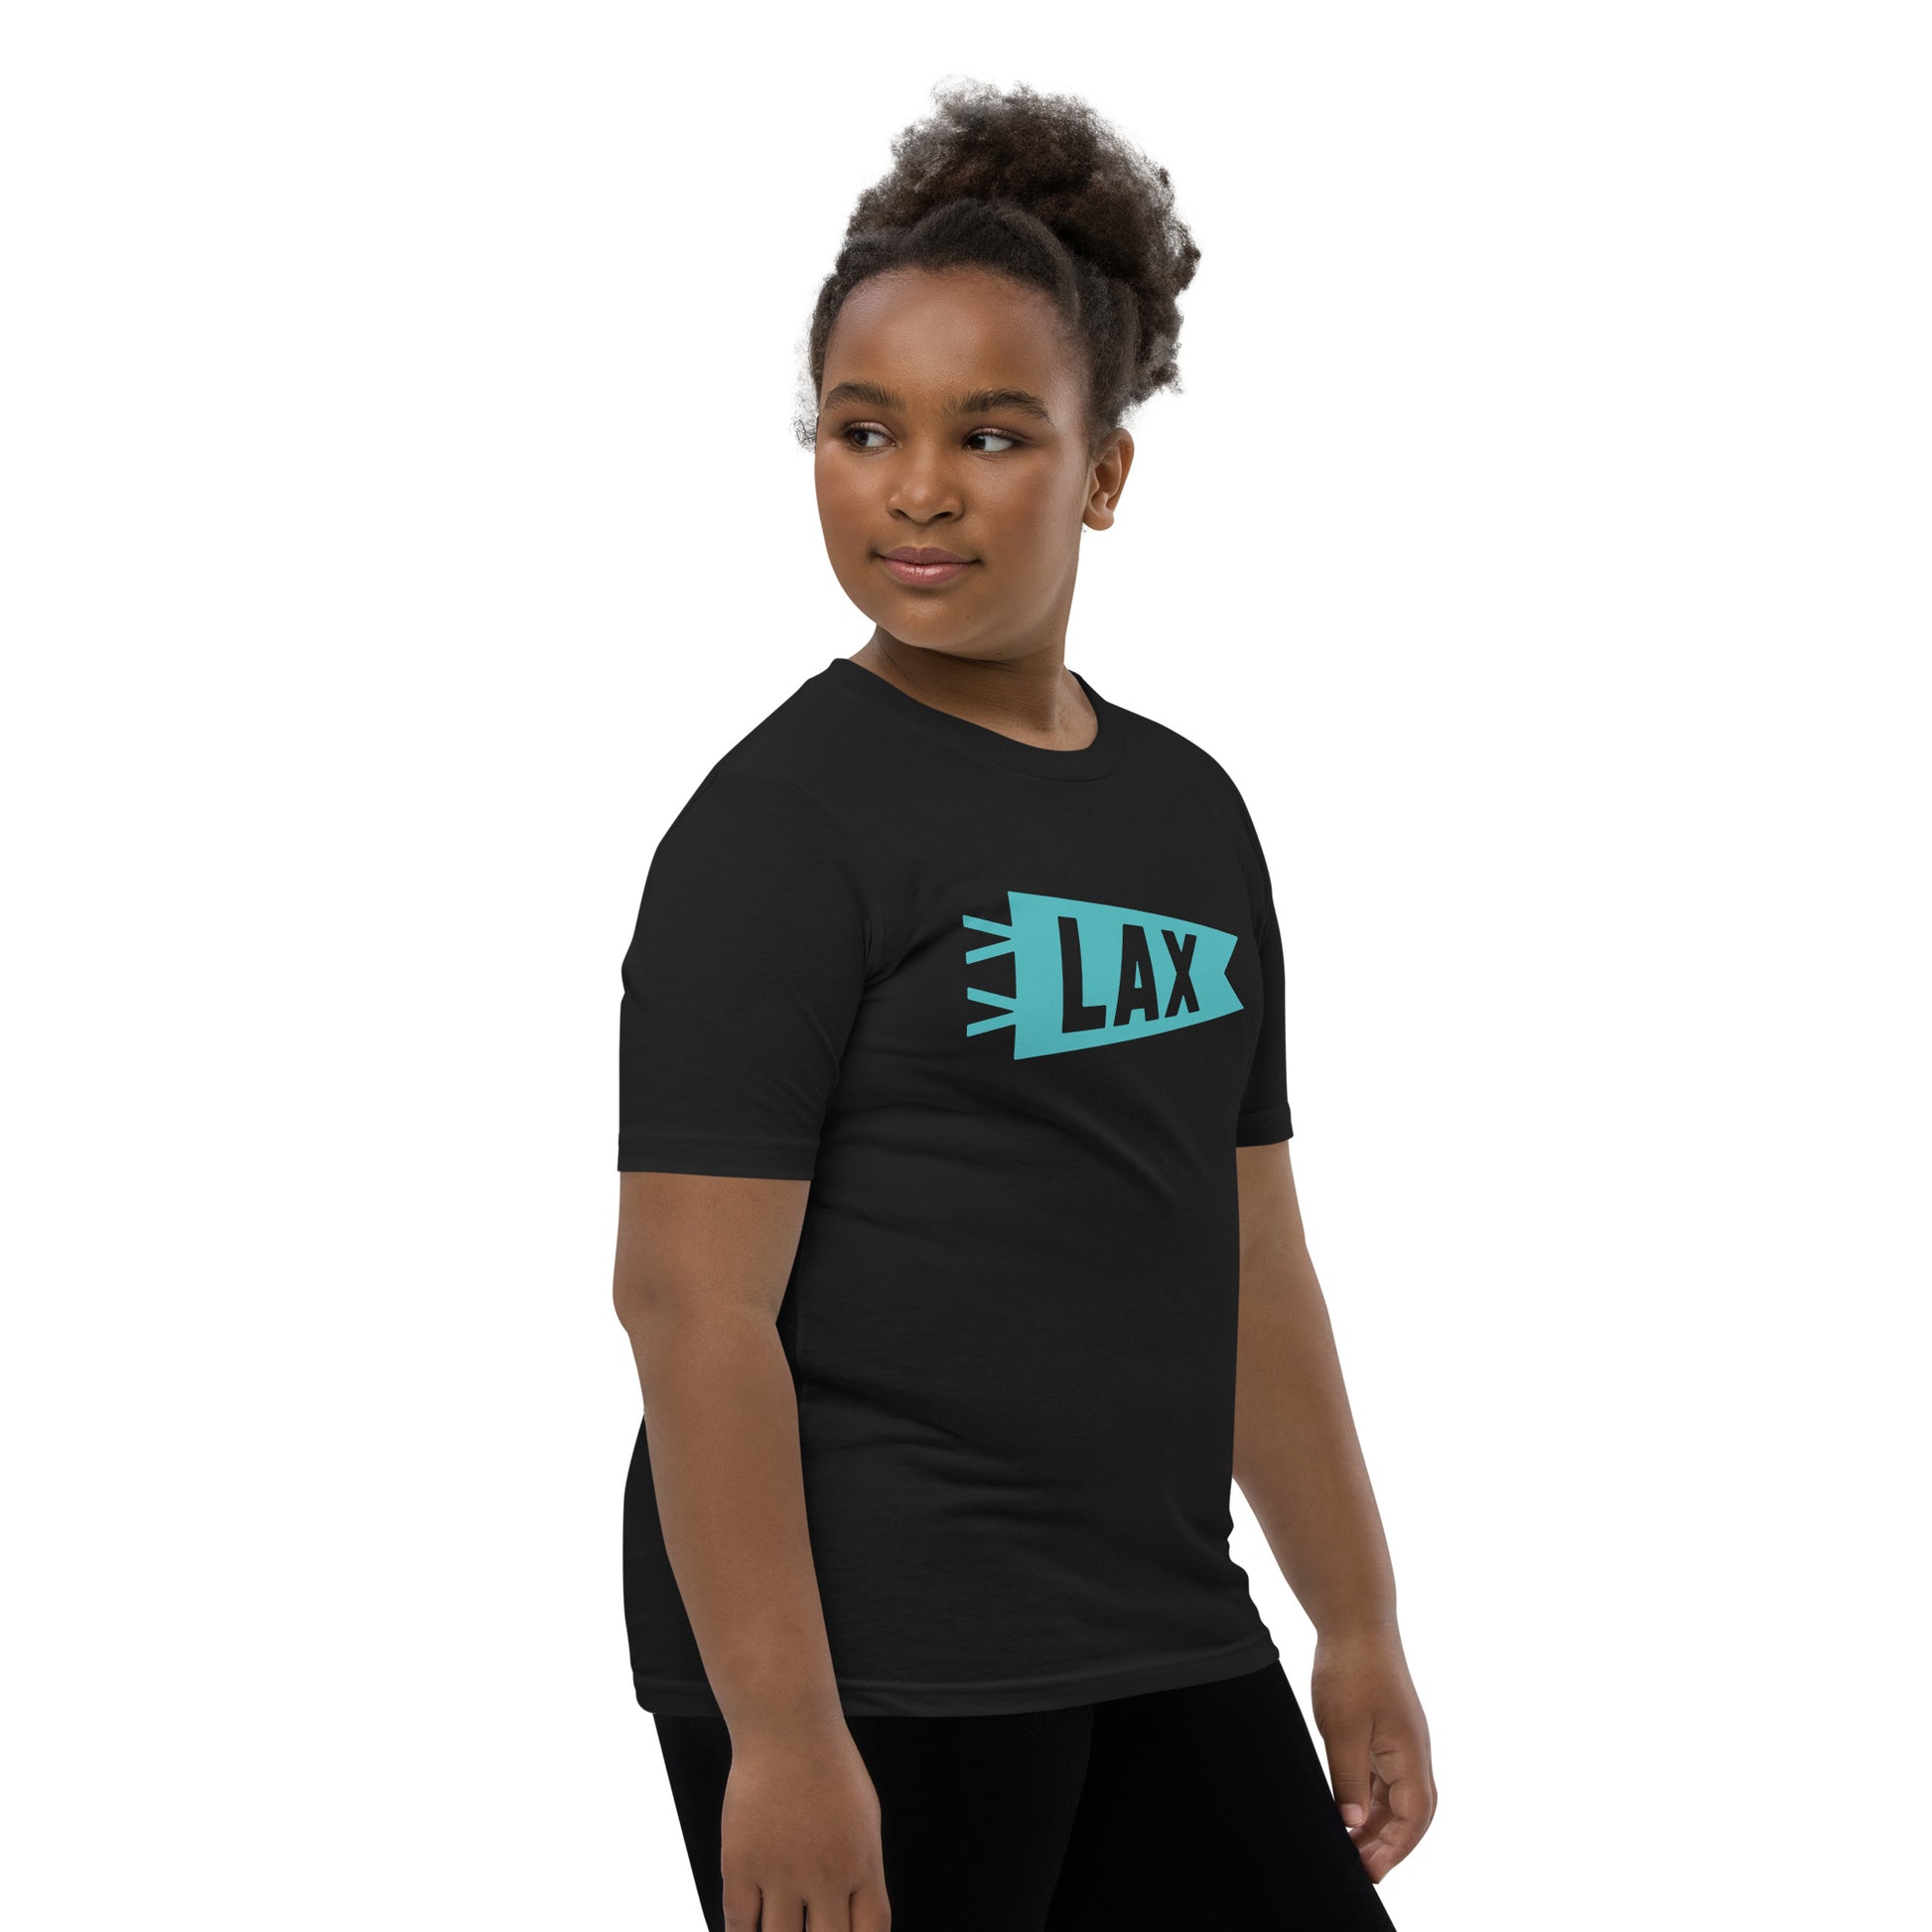 Kid's Airport Code Tee - Viking Blue Graphic • LAX Los Angeles • YHM Designs - Image 03